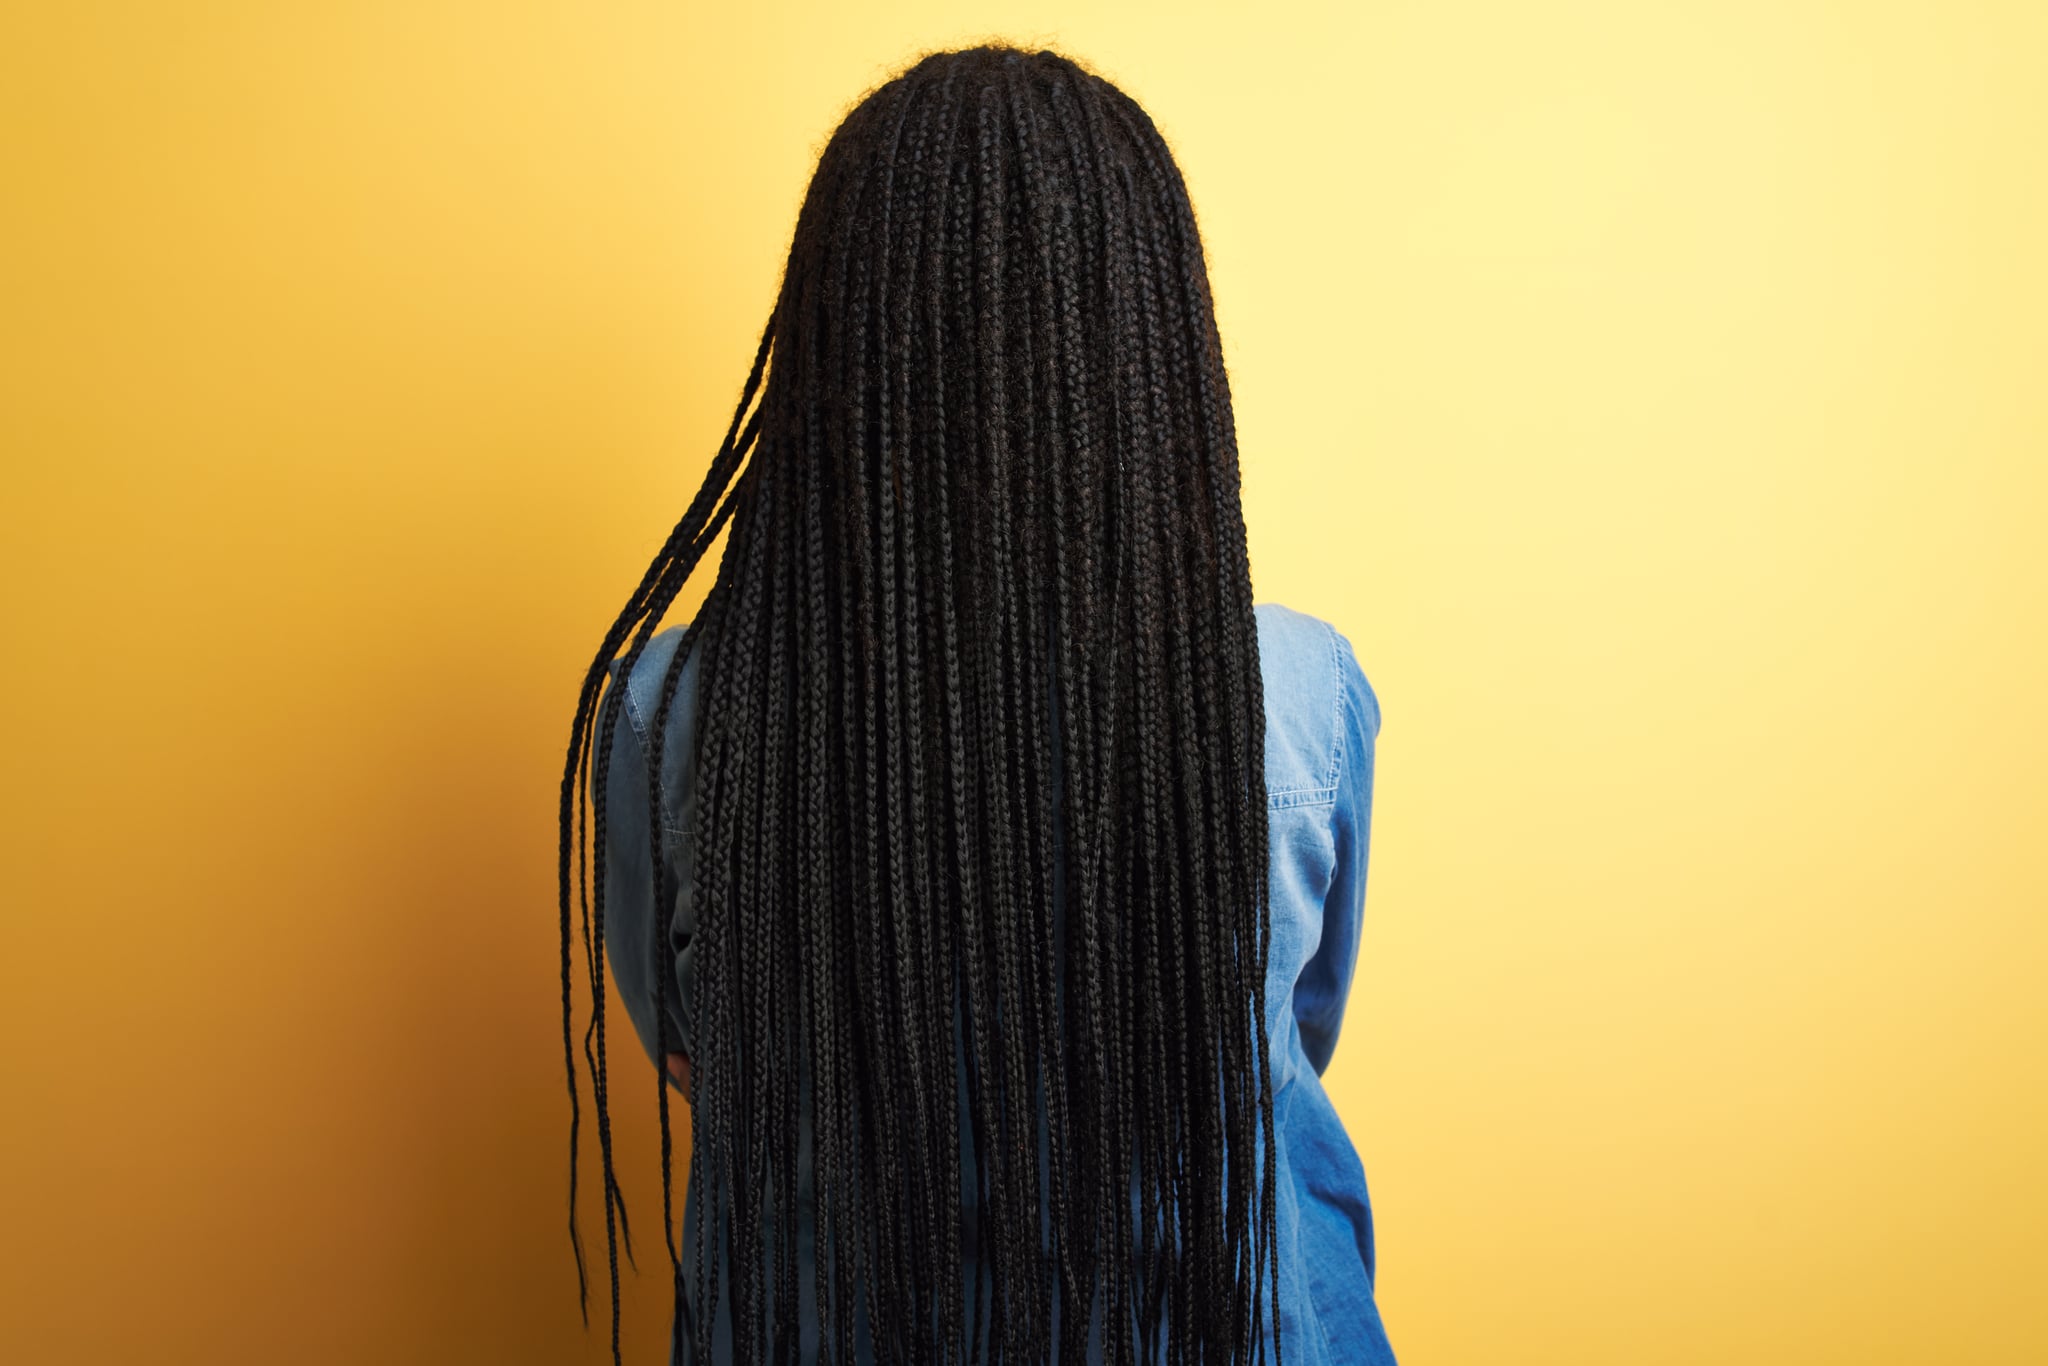 Young african american woman wearing denim shirt standing over isolated yellow background standing backwards looking away with crossed arms